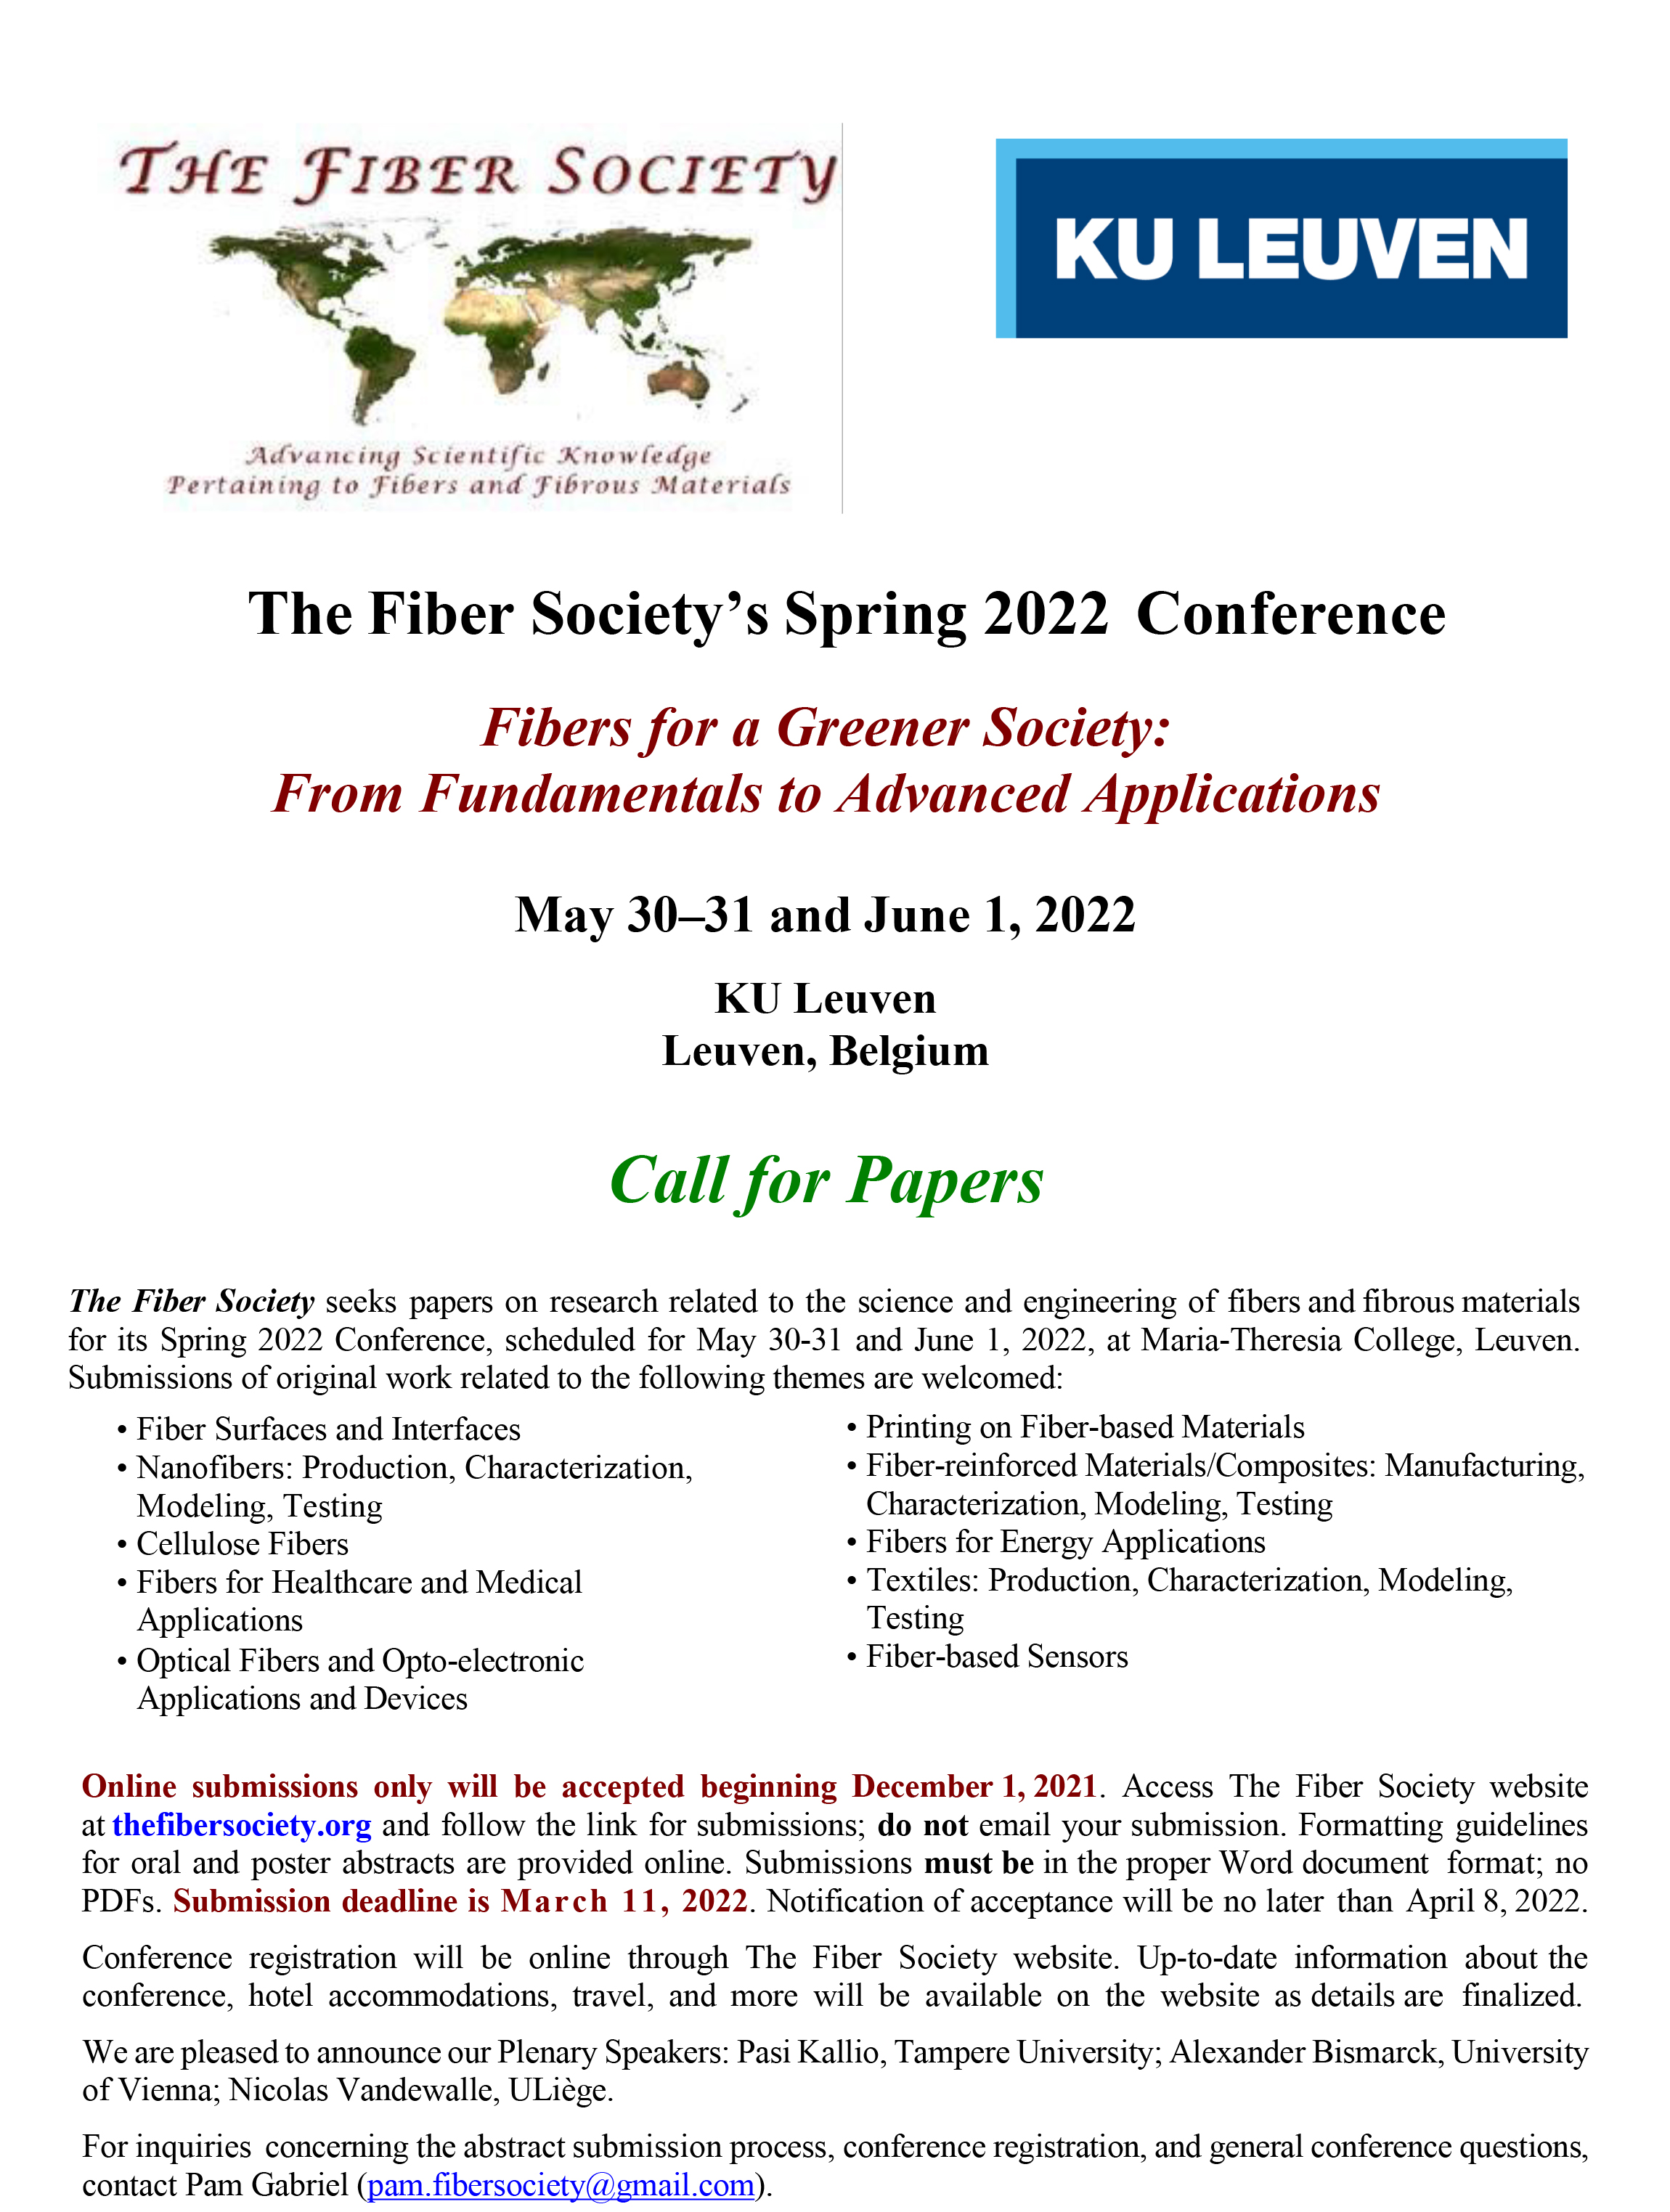 2022 Fiber Society Spring Conference Call for Papers